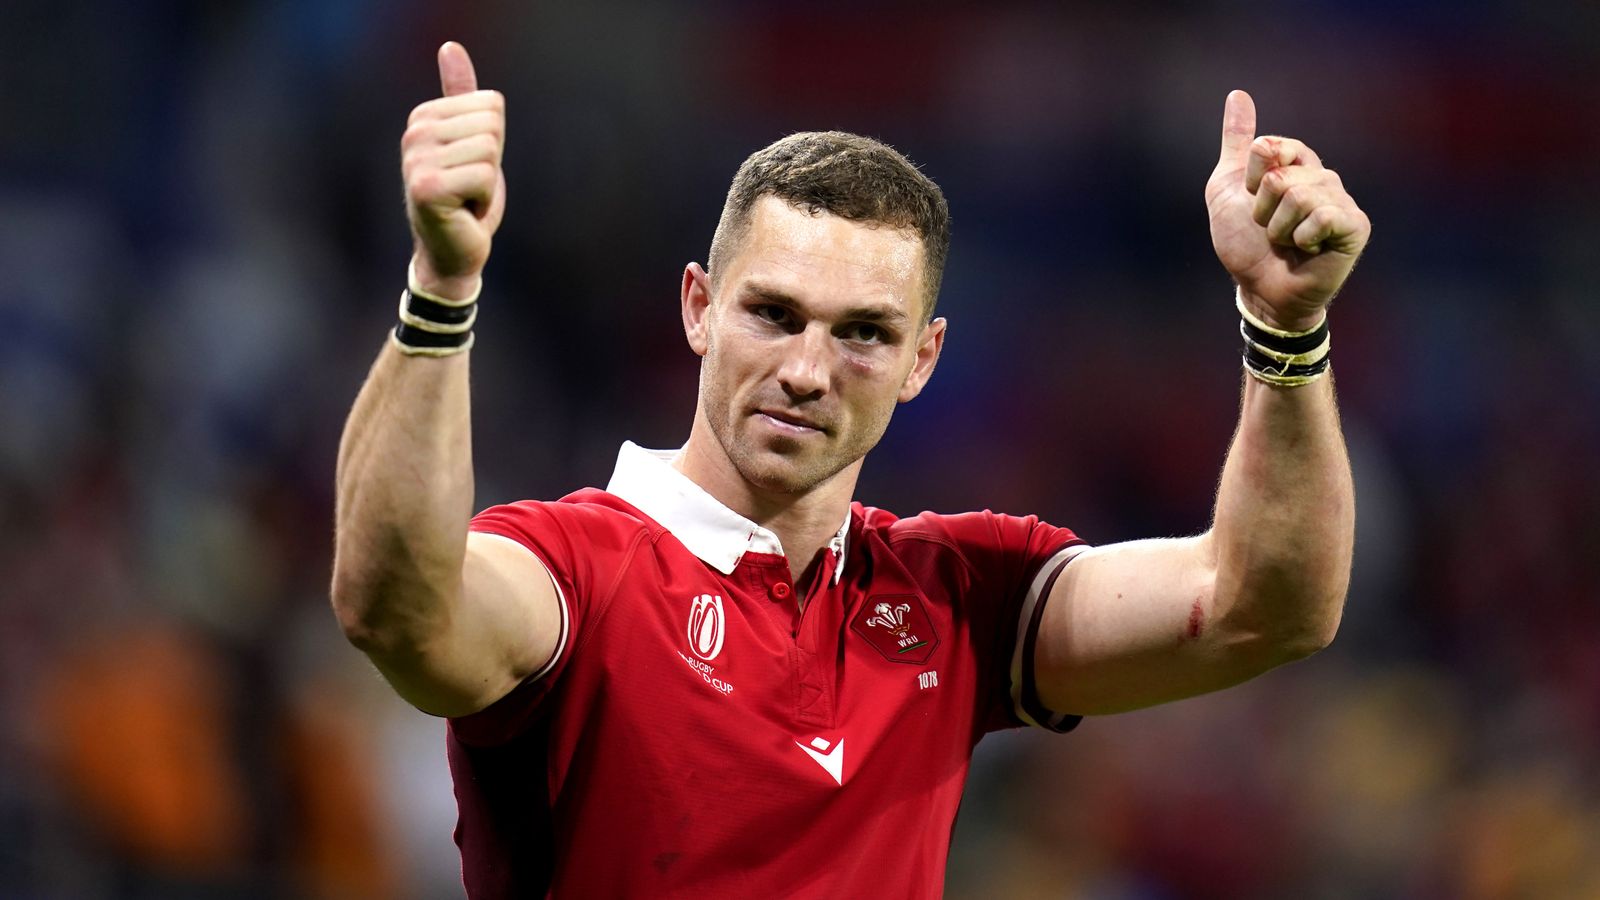 George North Announces Retirement from International Rugby